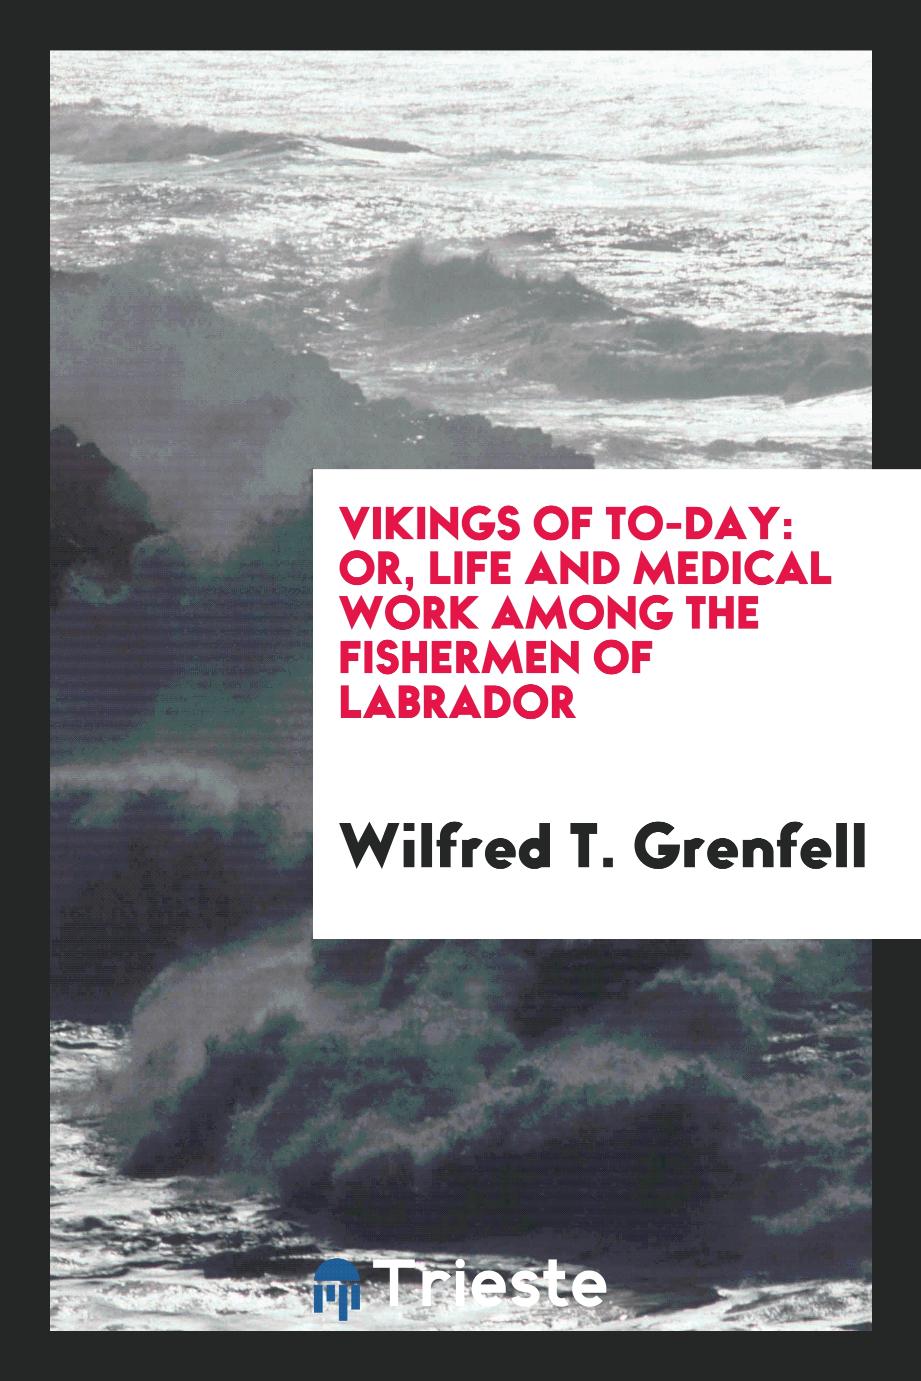 Vikings of To-Day: Or, Life and Medical Work among the Fishermen of Labrador